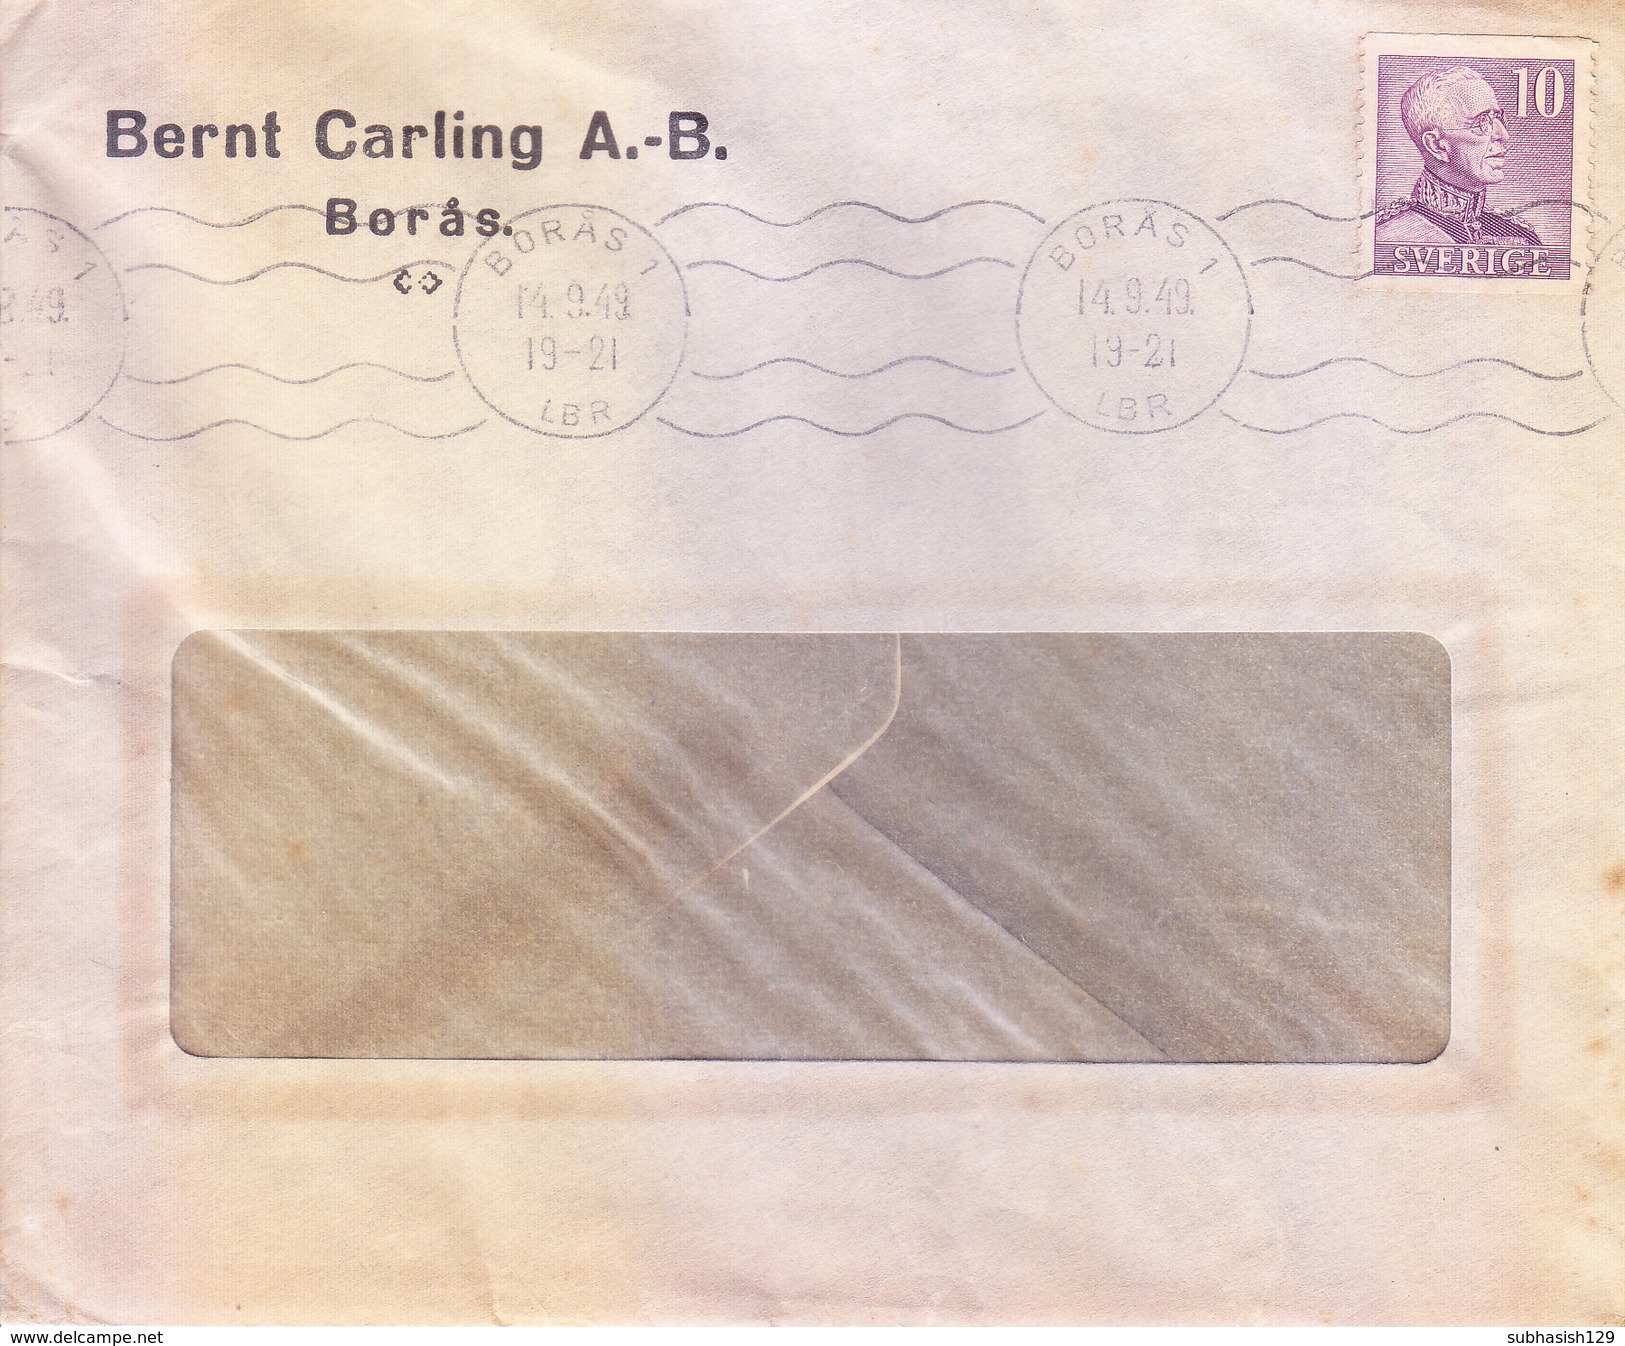 SWEDEN 1949 WINDOW COVER - BERNT CARLING A.-B., BORAS - Lettres & Documents